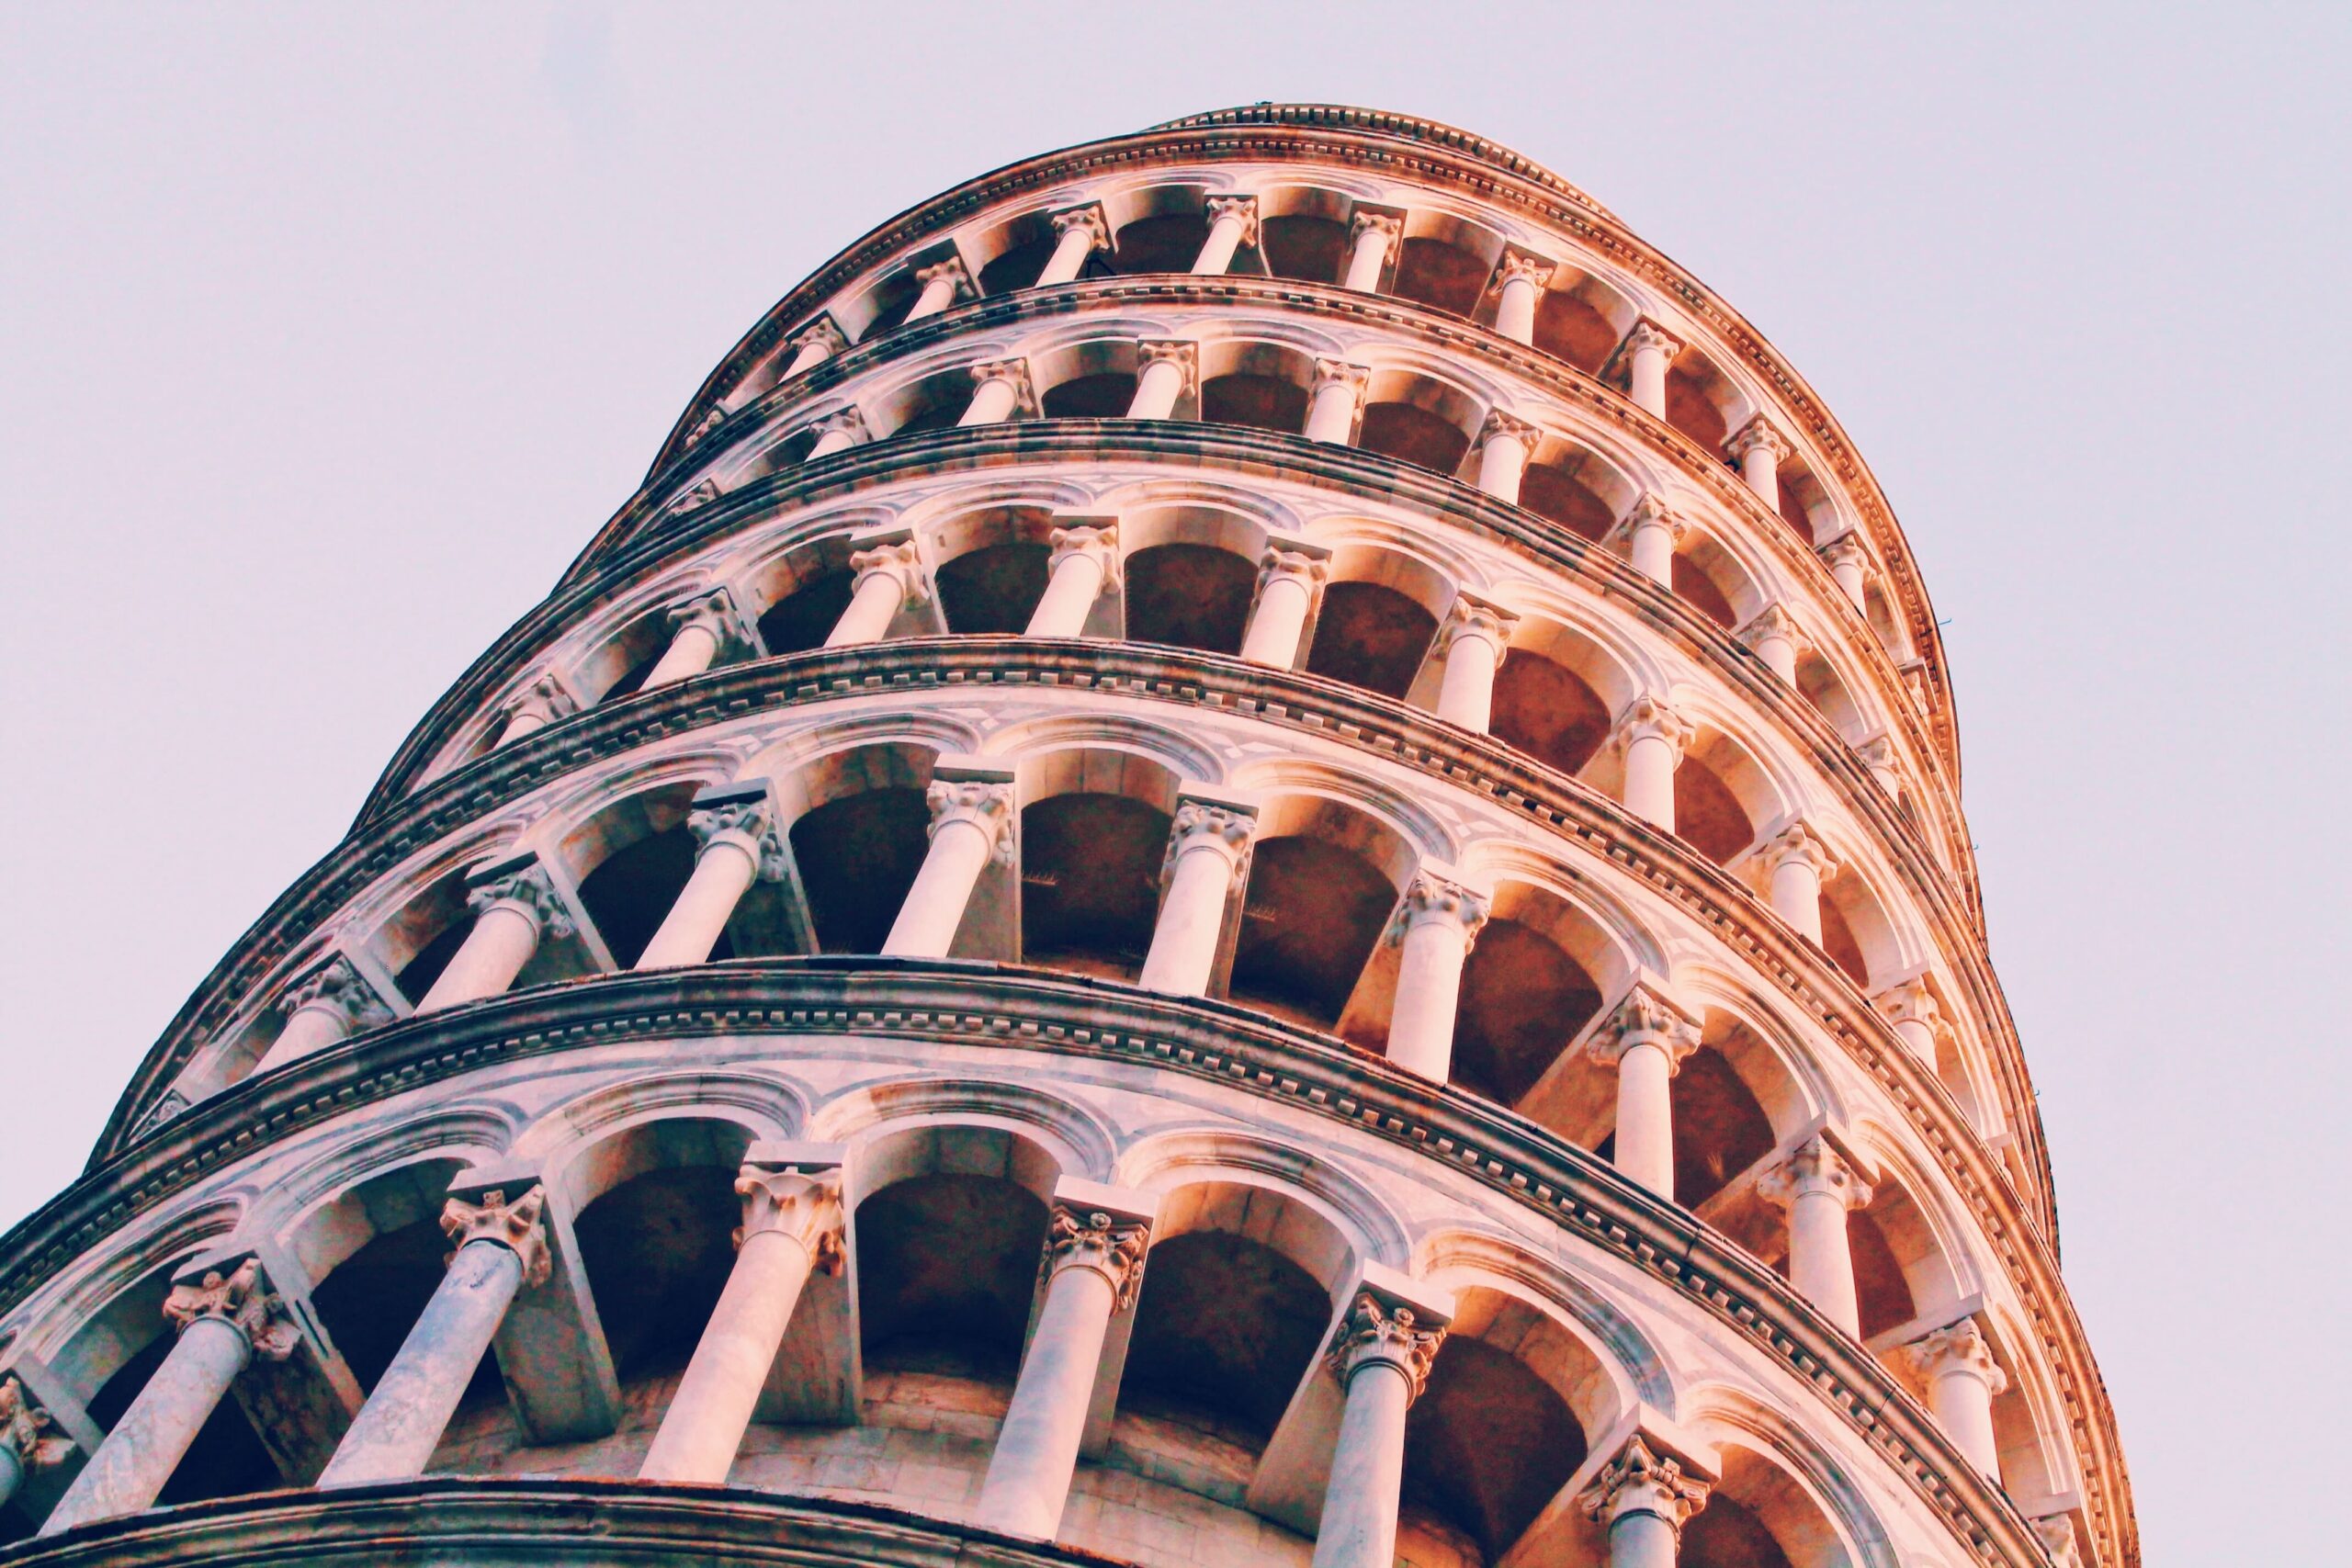 The Leaning Tower of Pisa in Tuscany